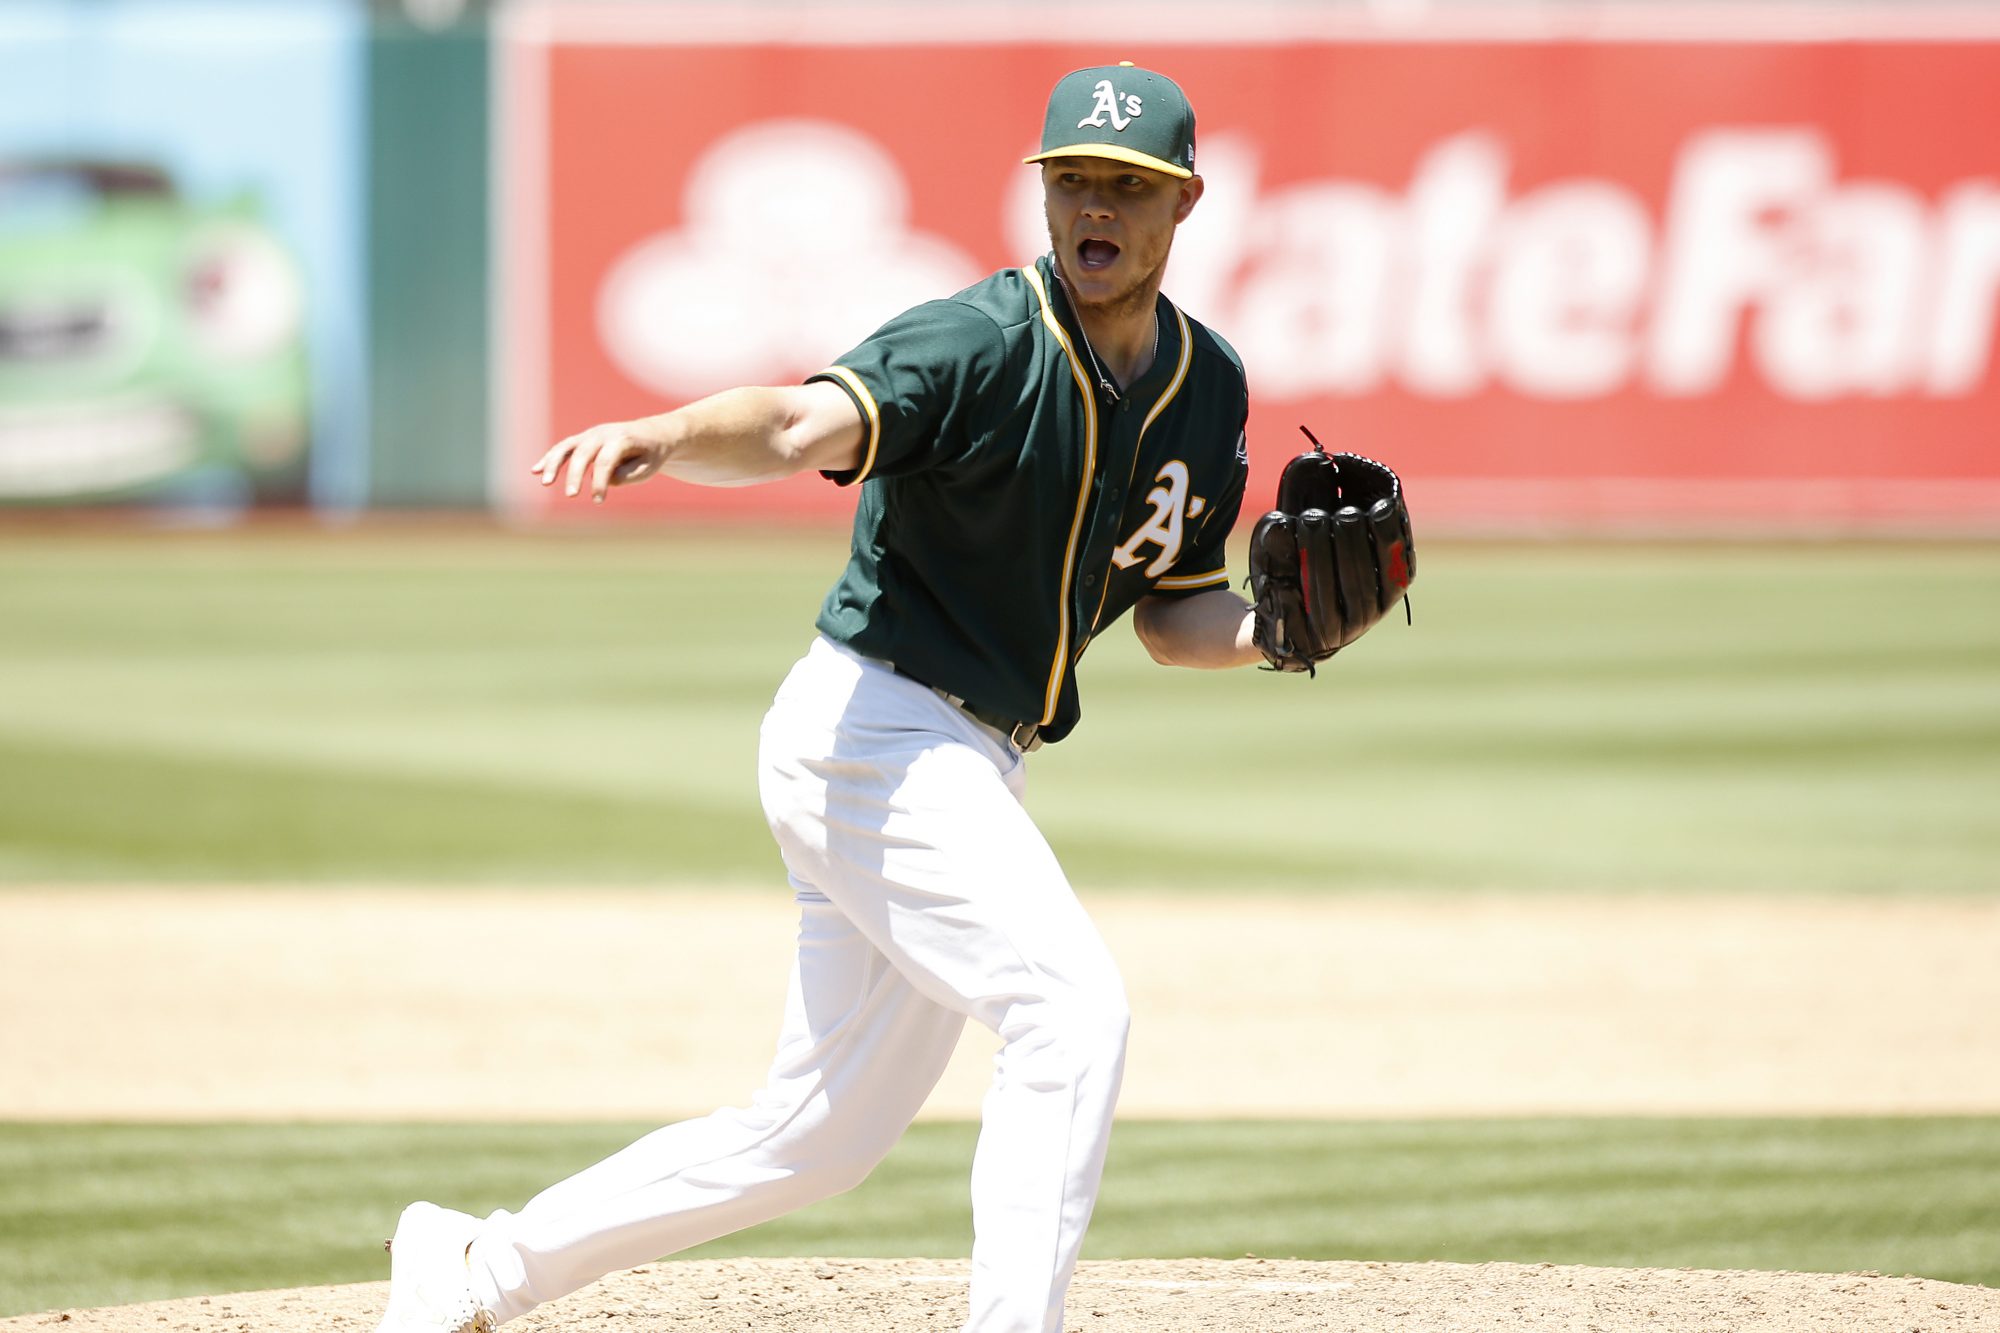 New York Yankees Hold All The Cards In Potential Trade For Sonny Gray 